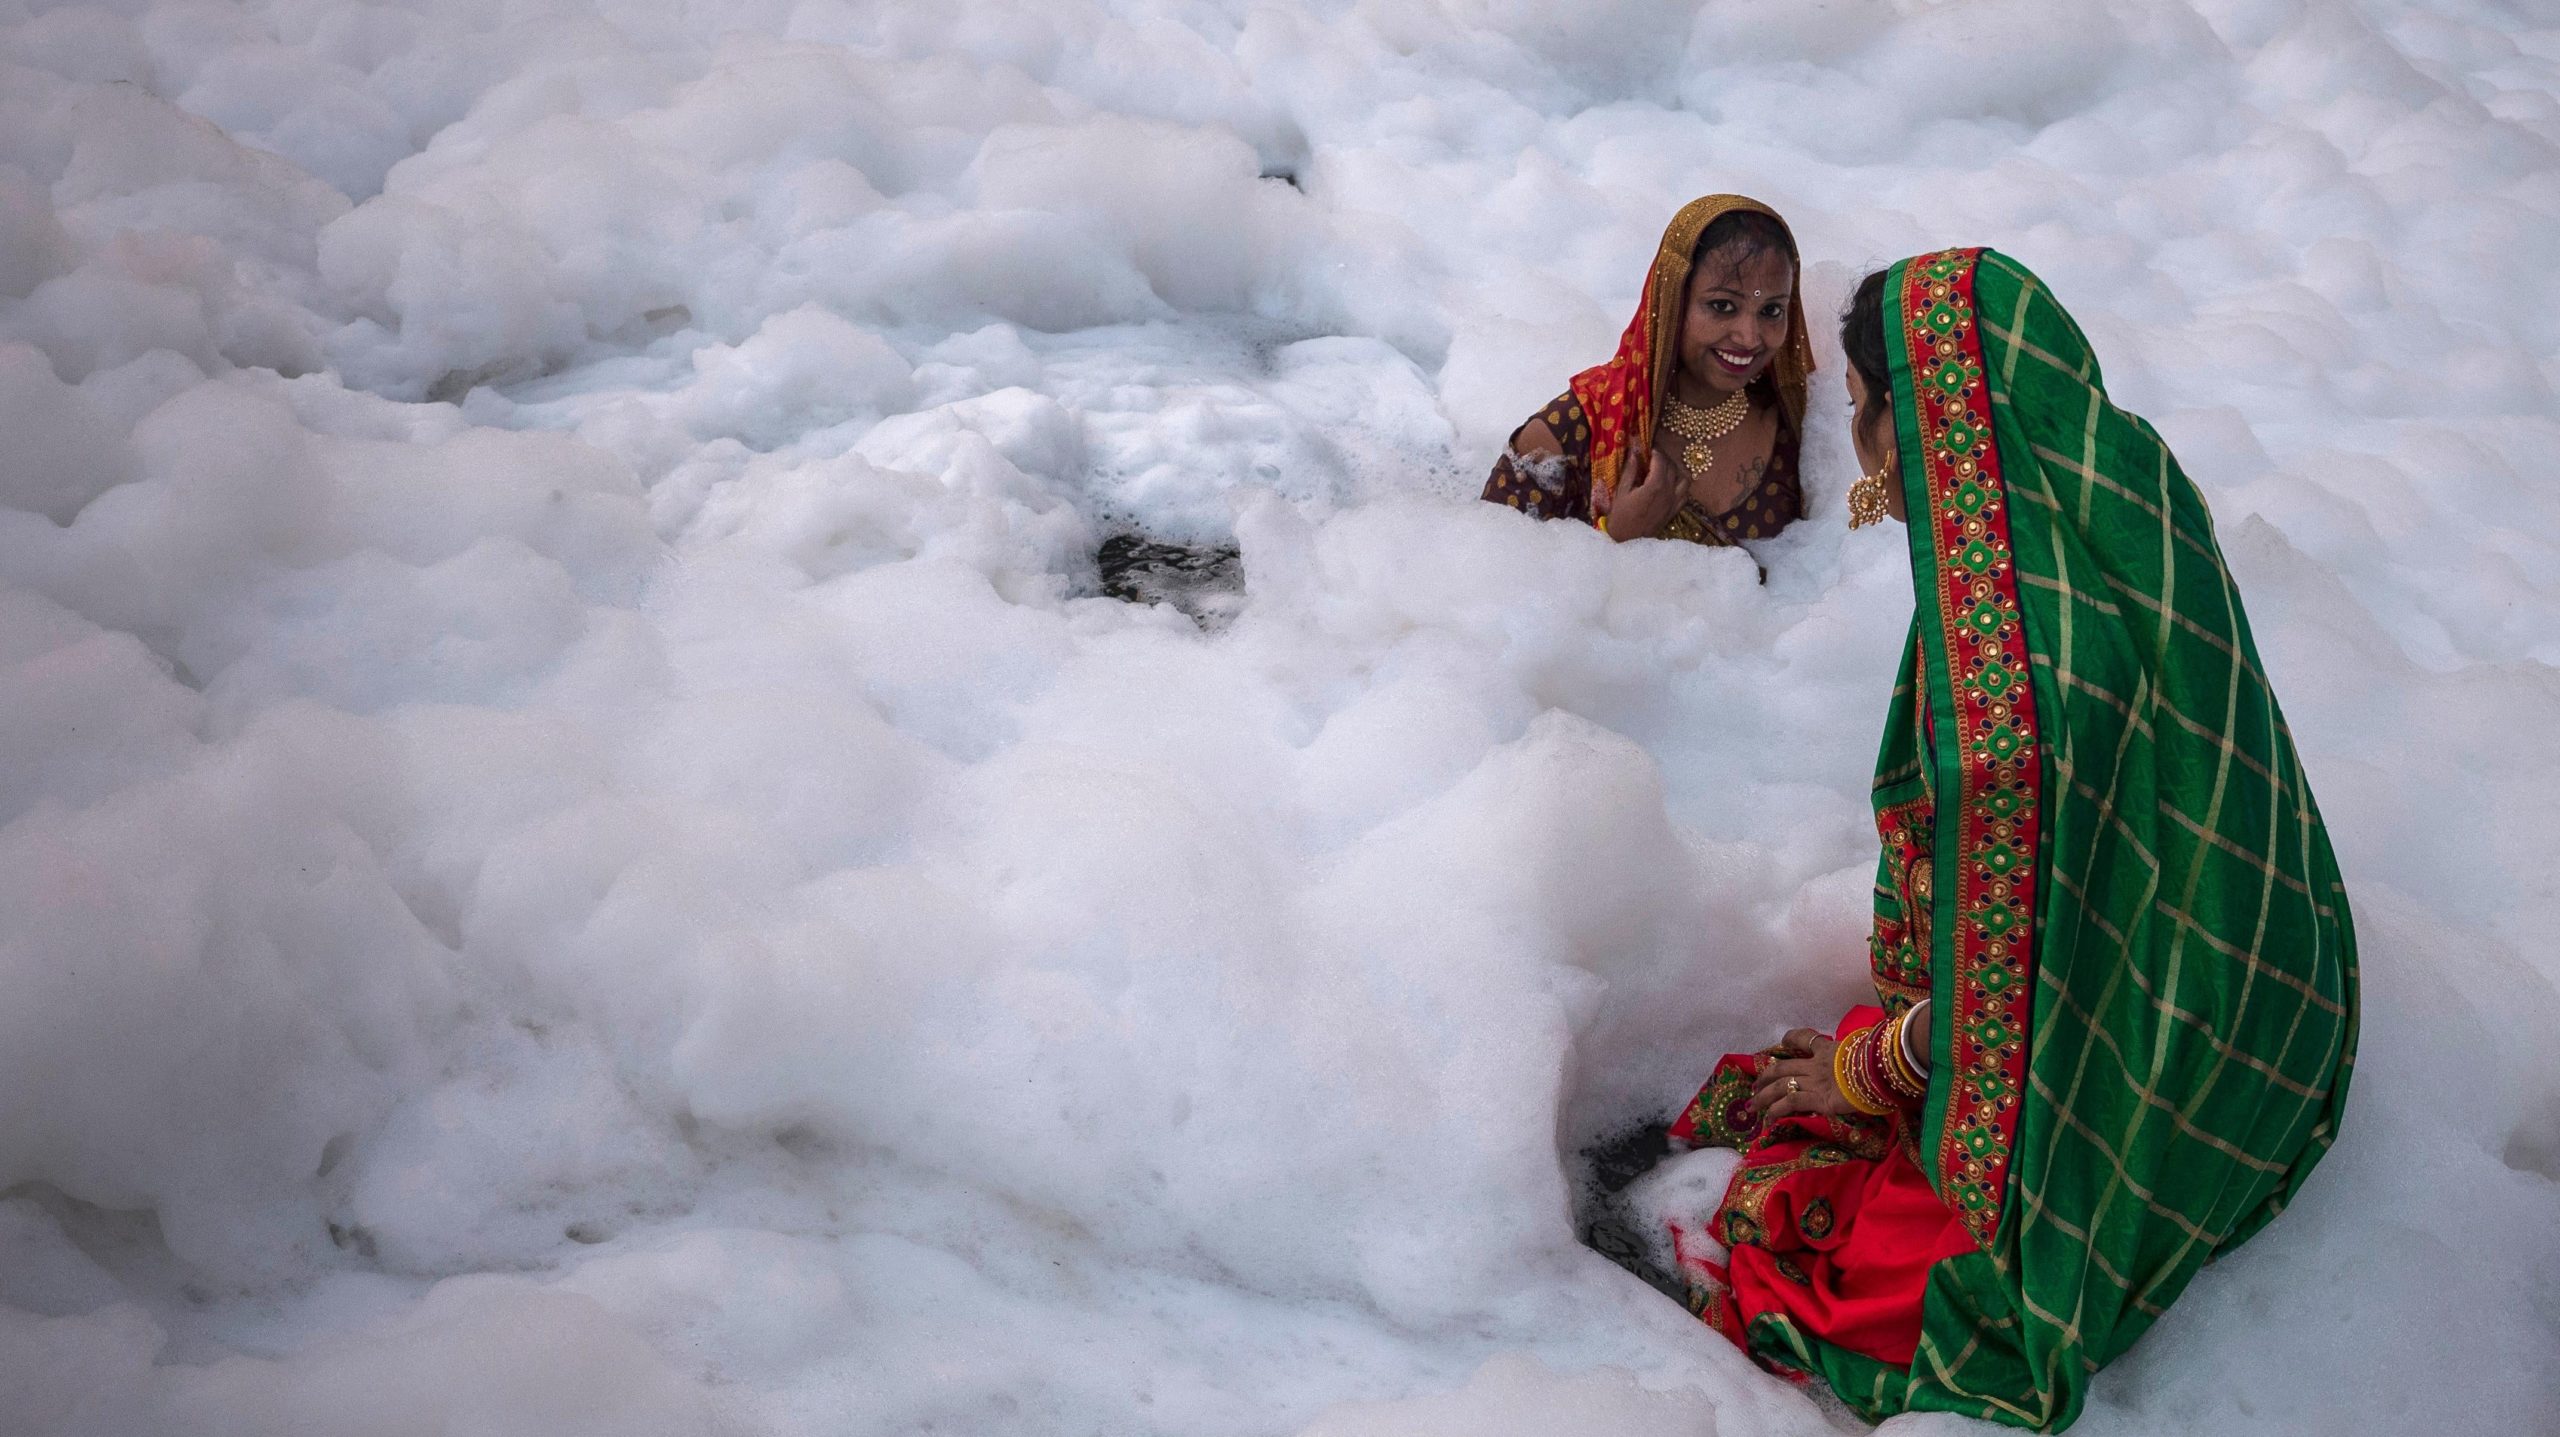 Women take a dip in the waters of River Yamuna amid toxic foam caused by pollution. (Photo: Anindito Mukherjee, Getty Images)